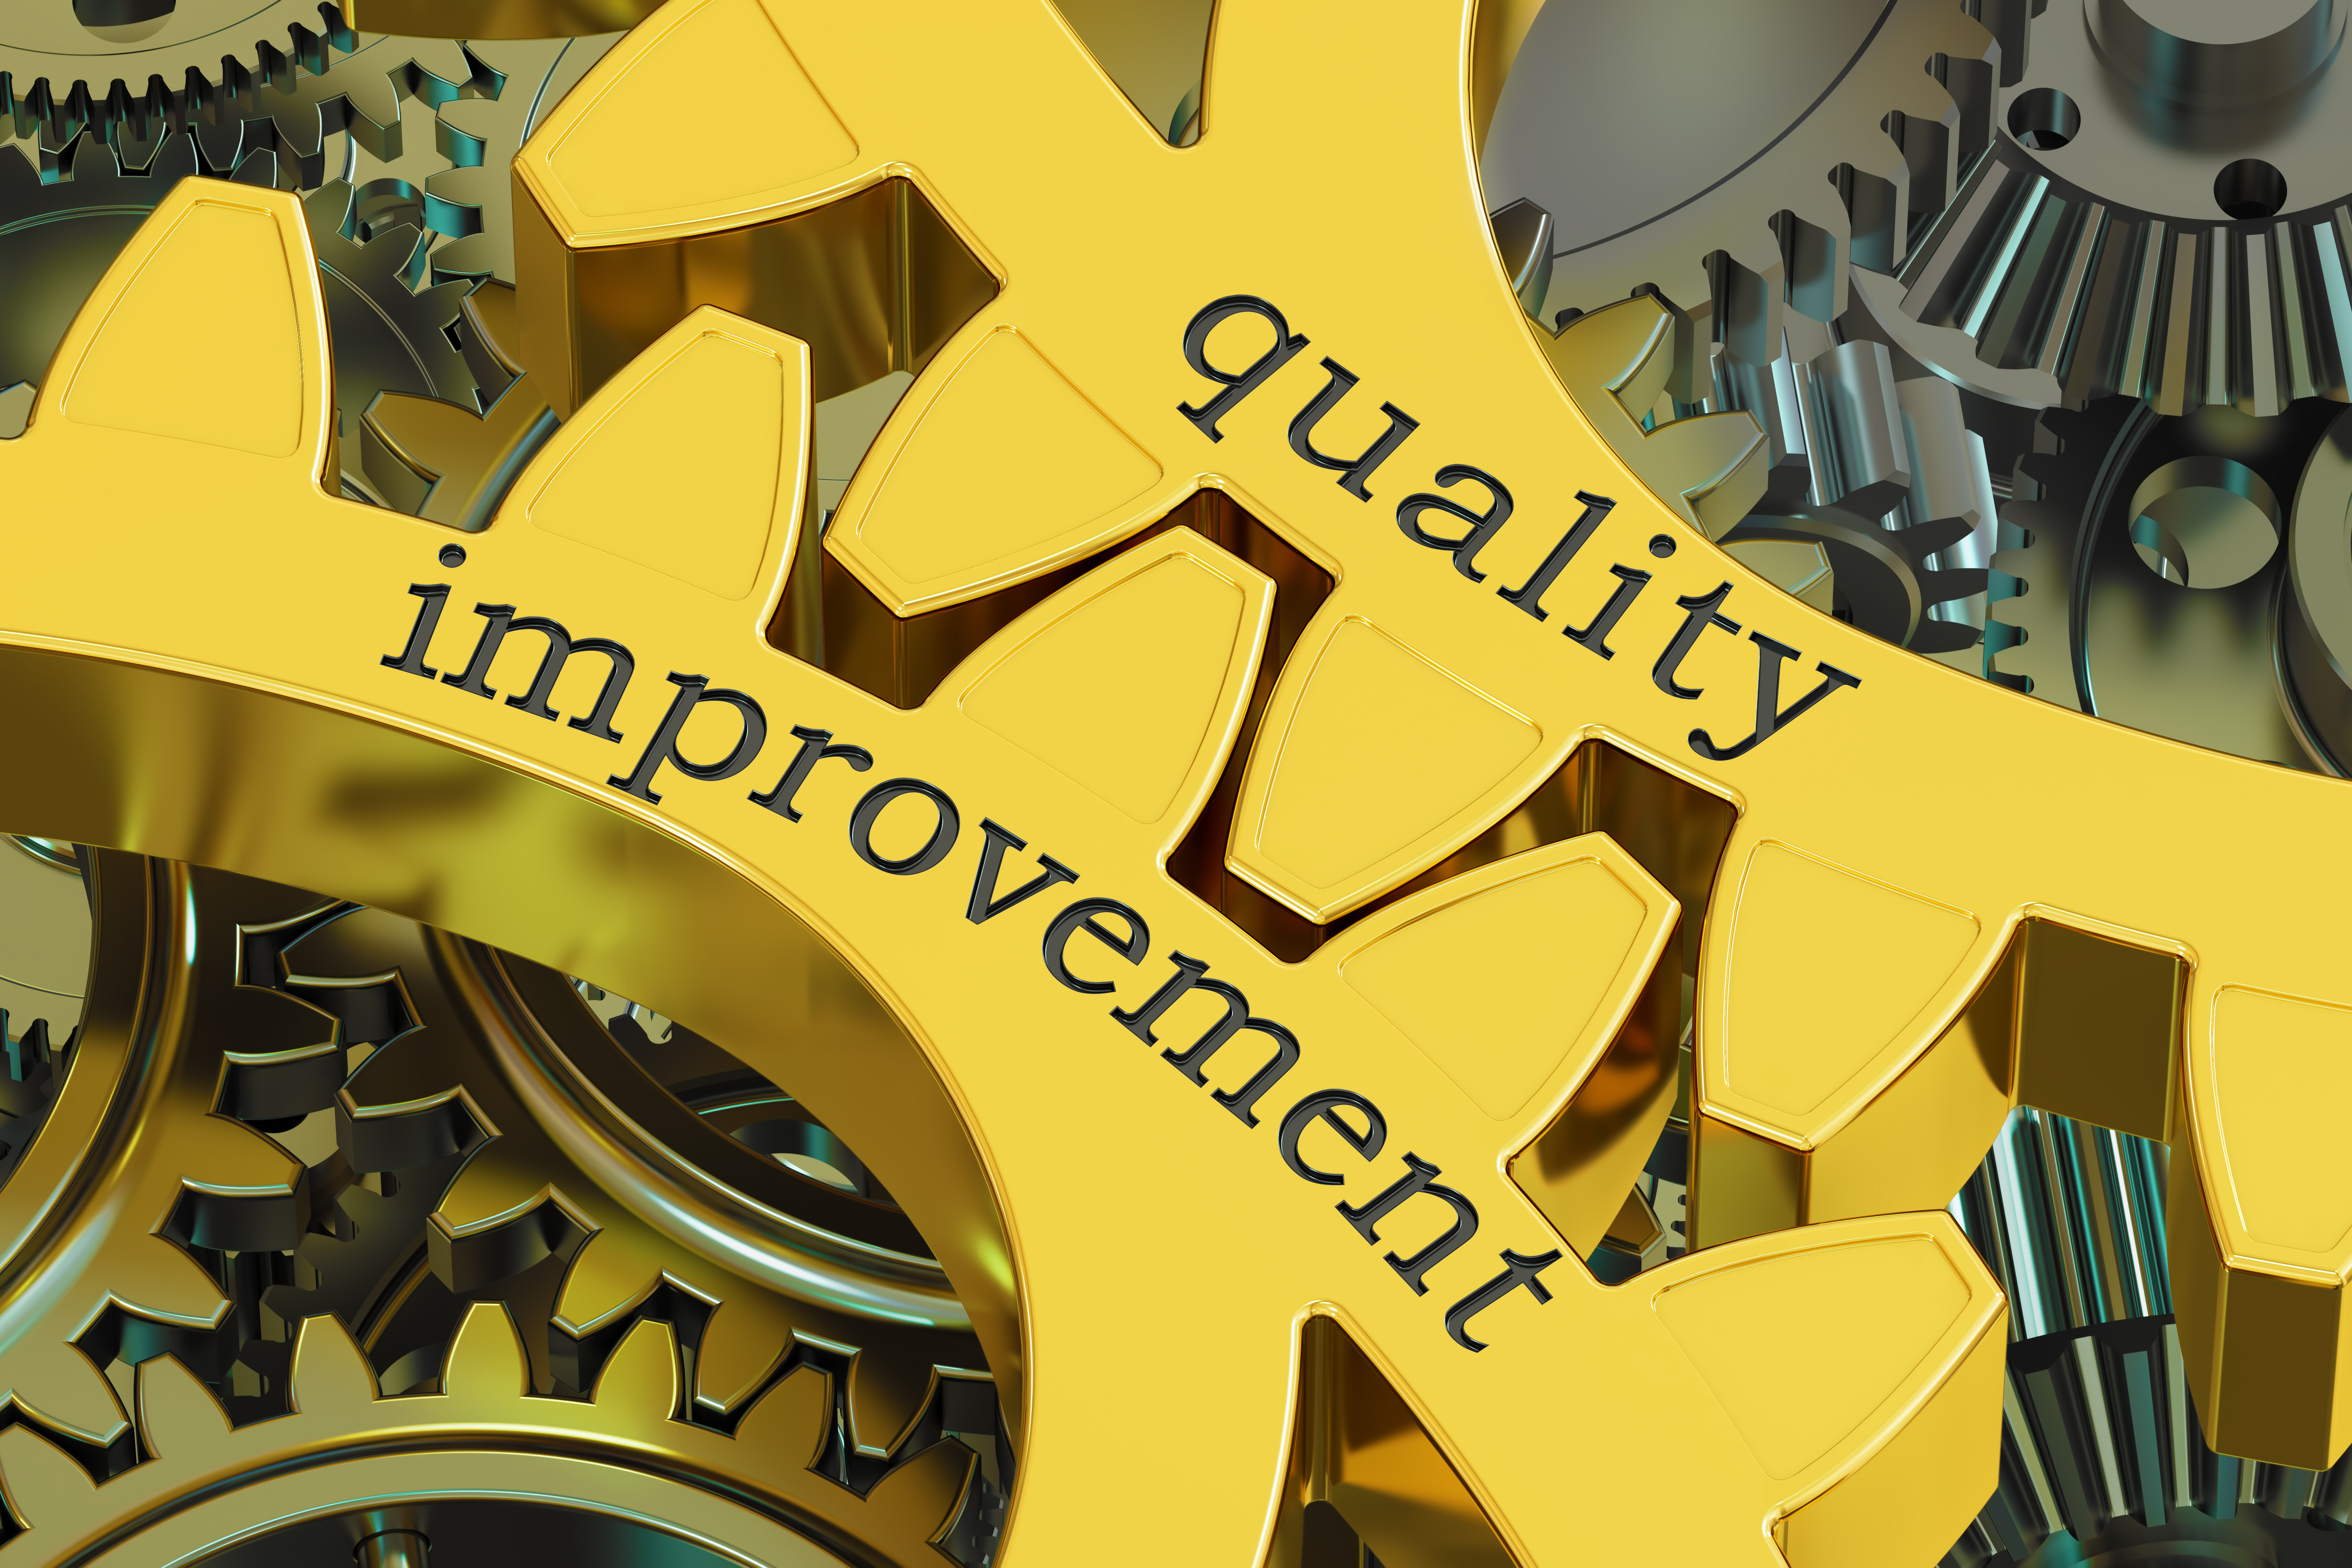 Tools that read quality and improvement.